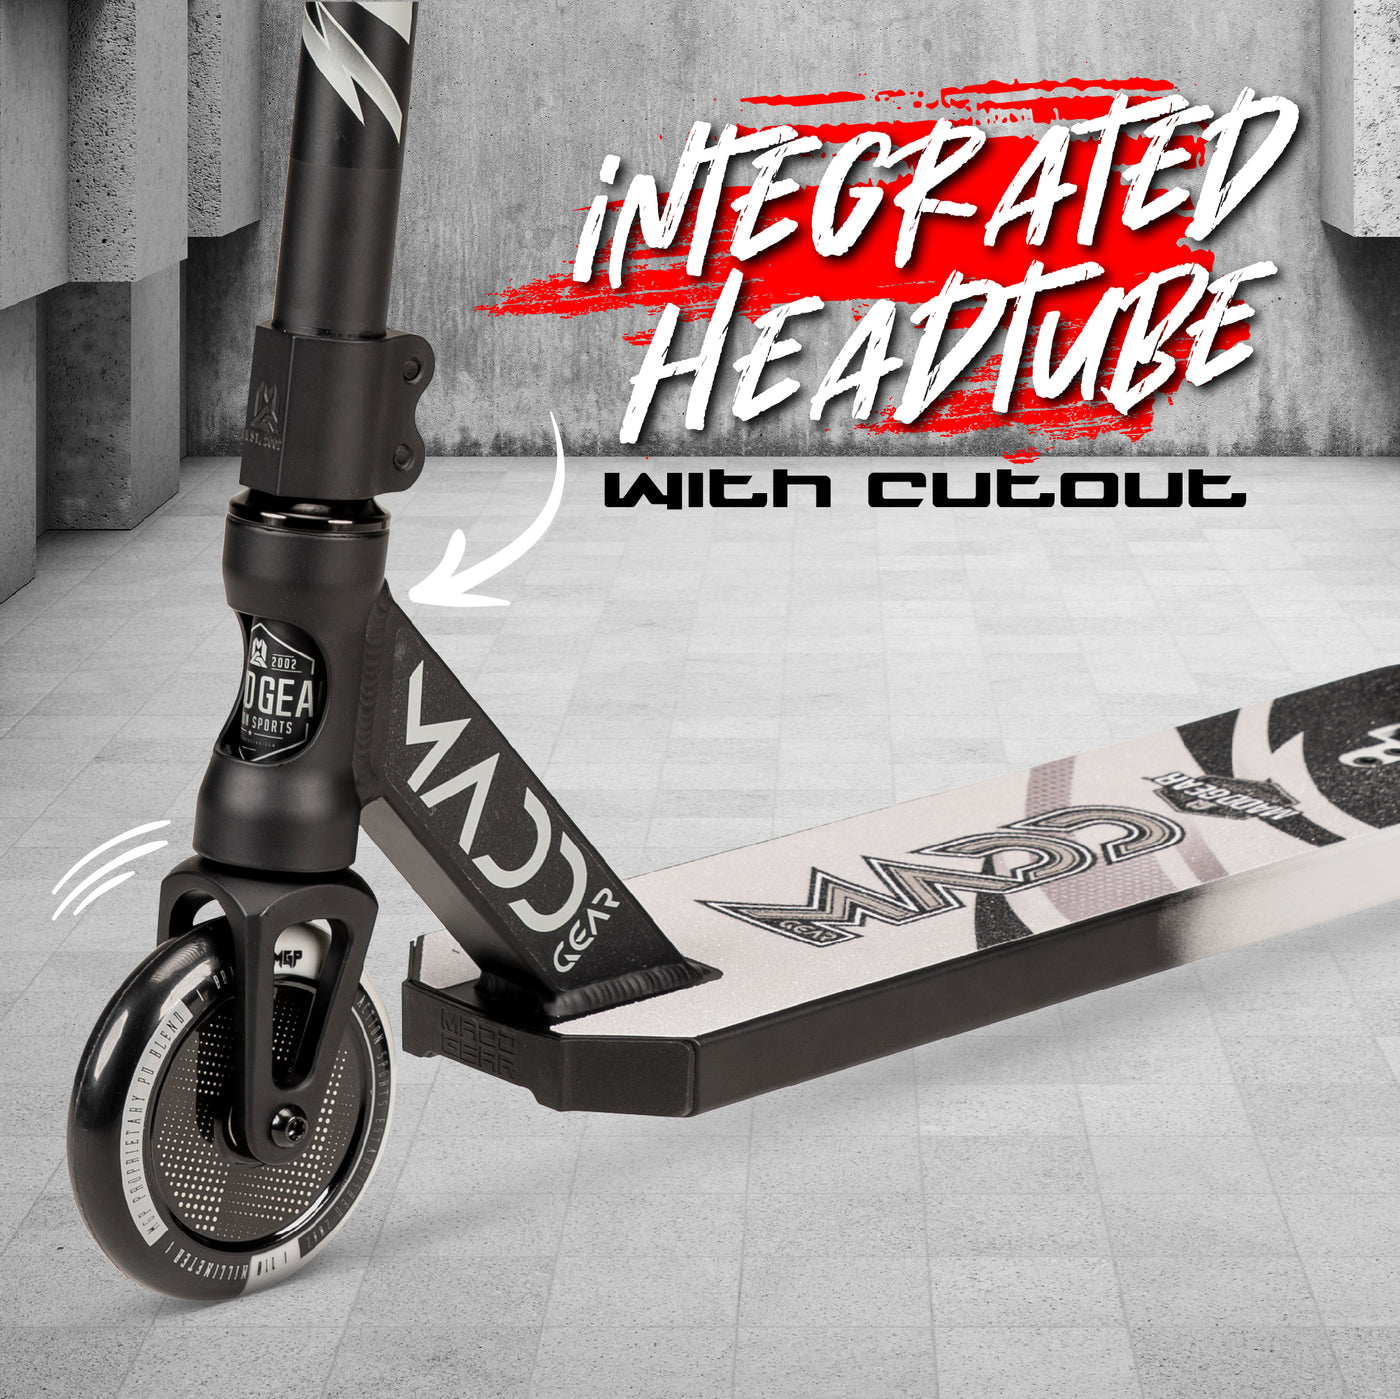 Madd Gear MGP Kick Pro Stunt Scooter Complete High Quality Razor Pro Trick Skate Park Mad Black Grey 5" Deck Integrated Headtube with Cutout